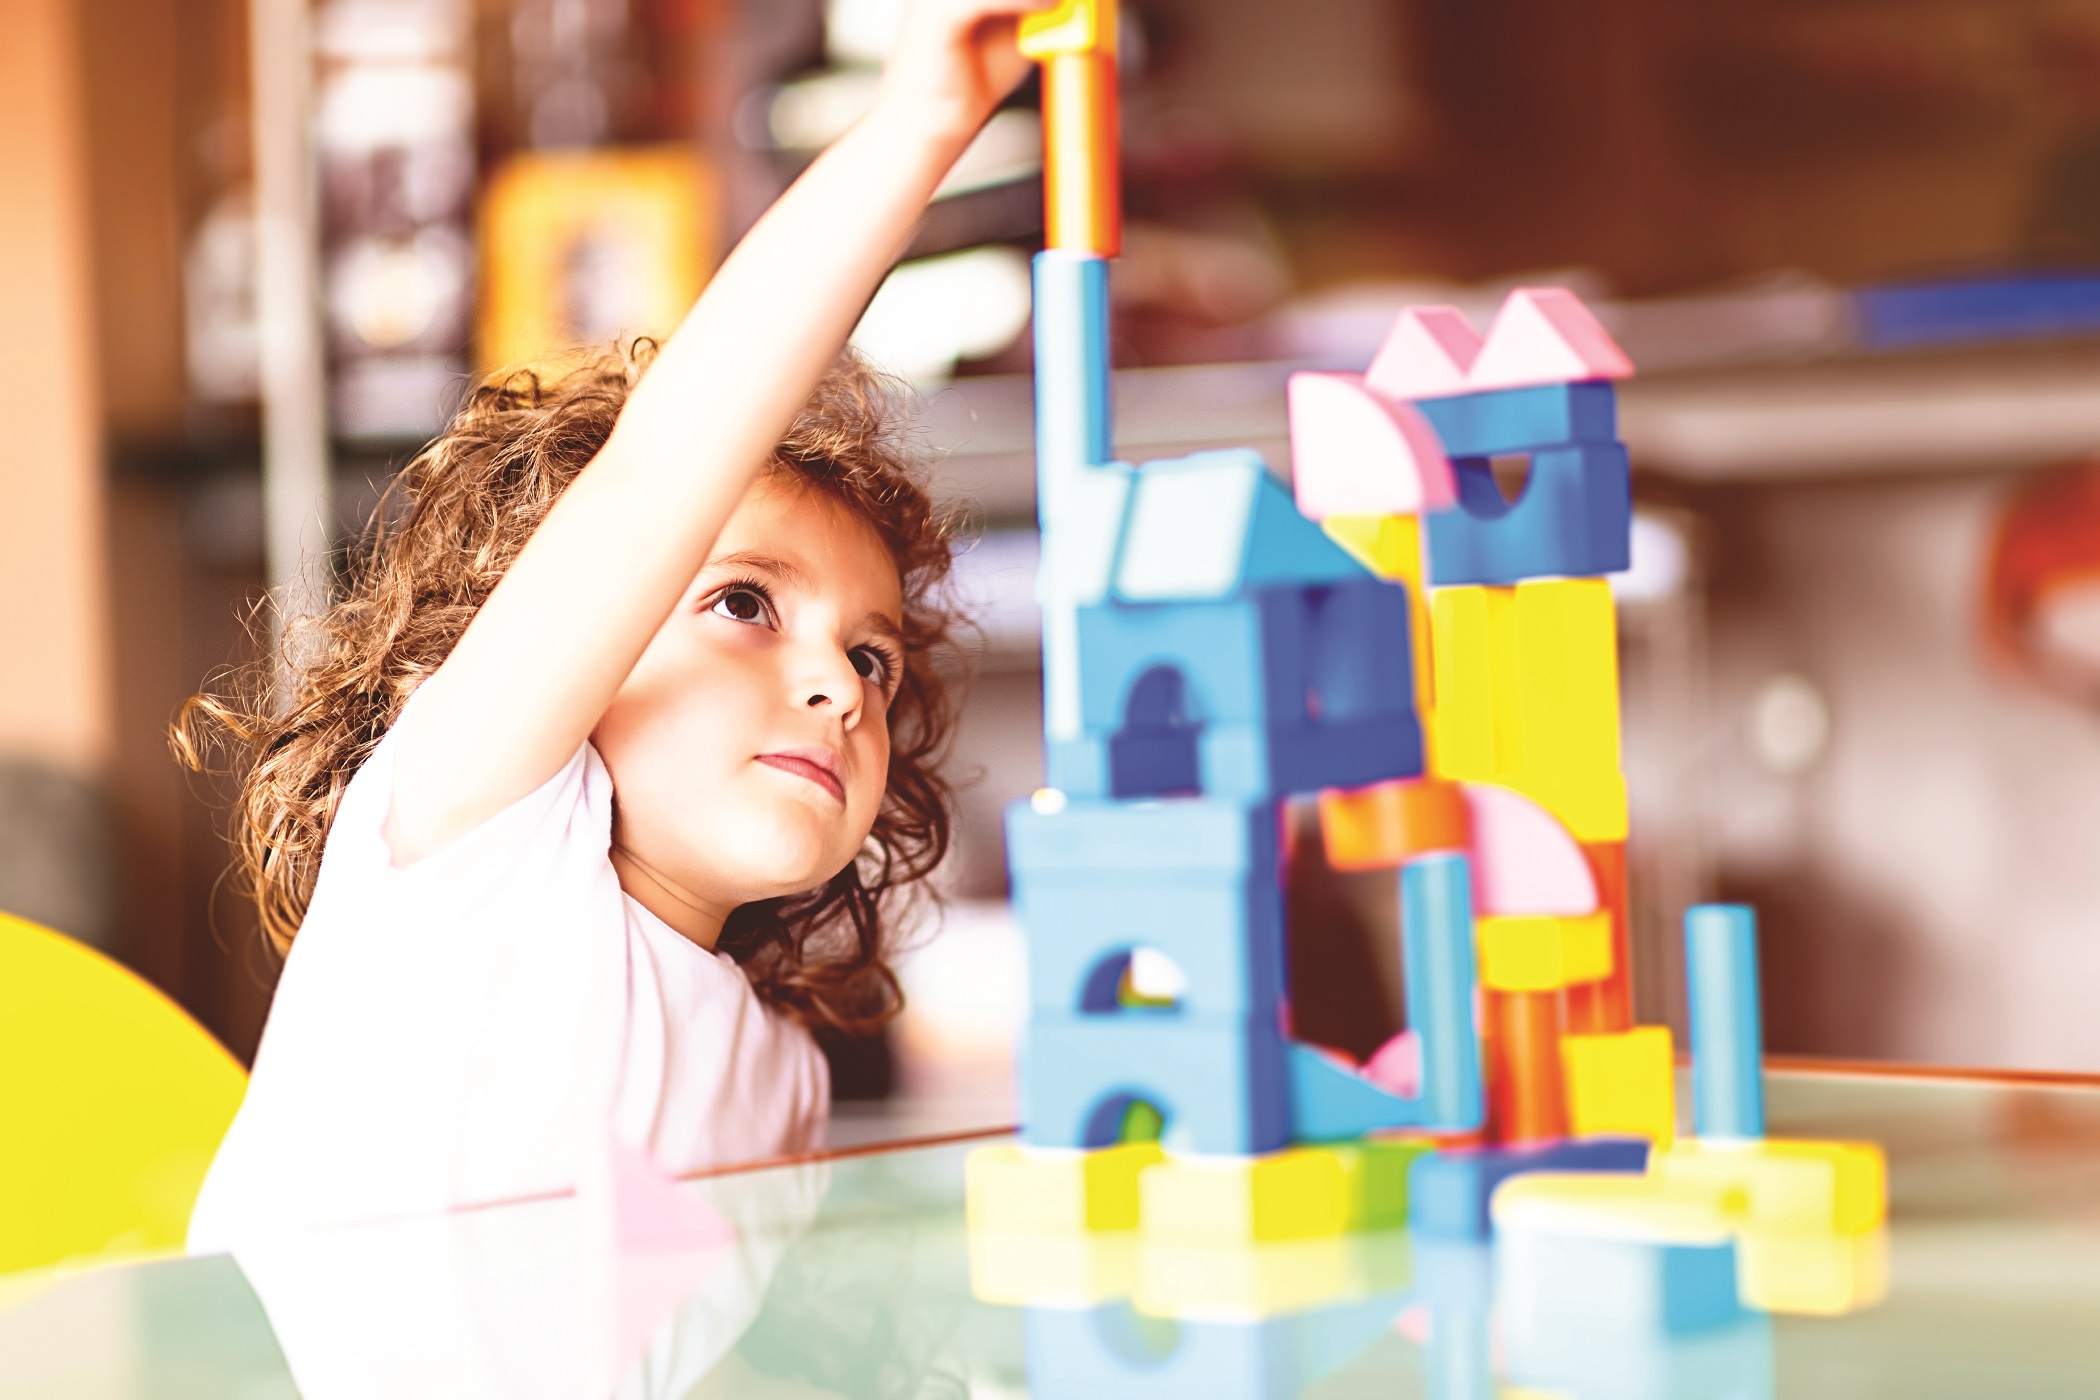 Little girl building a house with cubes, indoors.